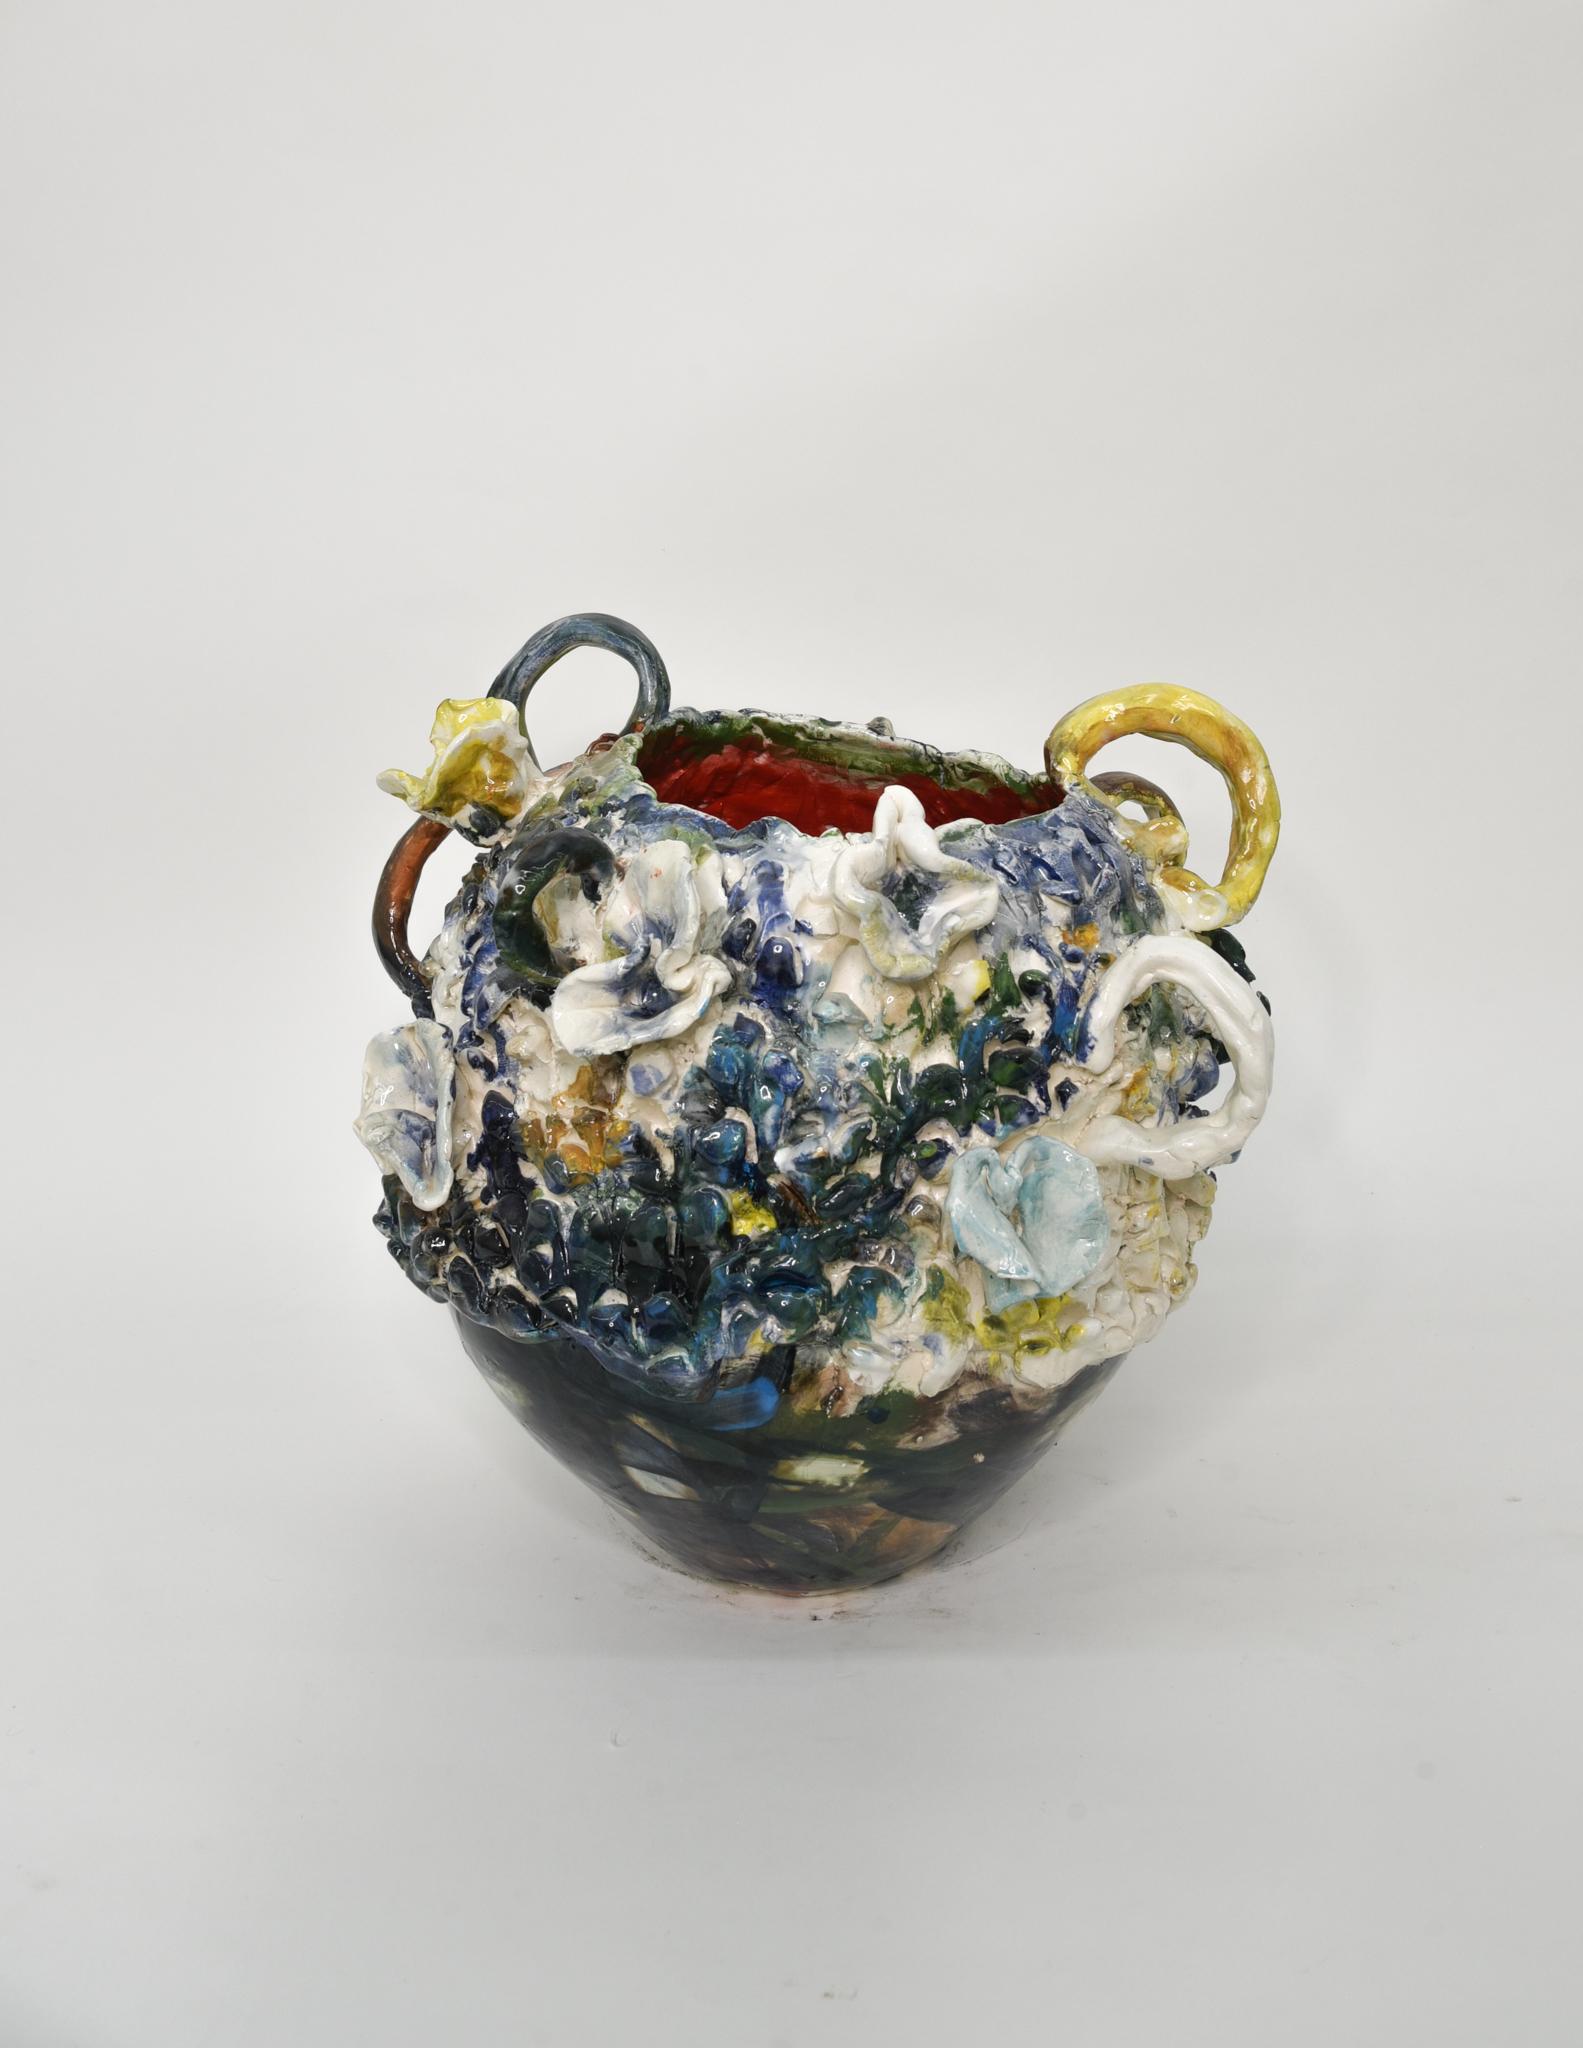 Charo Oquet Still-Life Sculpture - Blue and Yellow. Glazed ceramic abstract jar sculpture